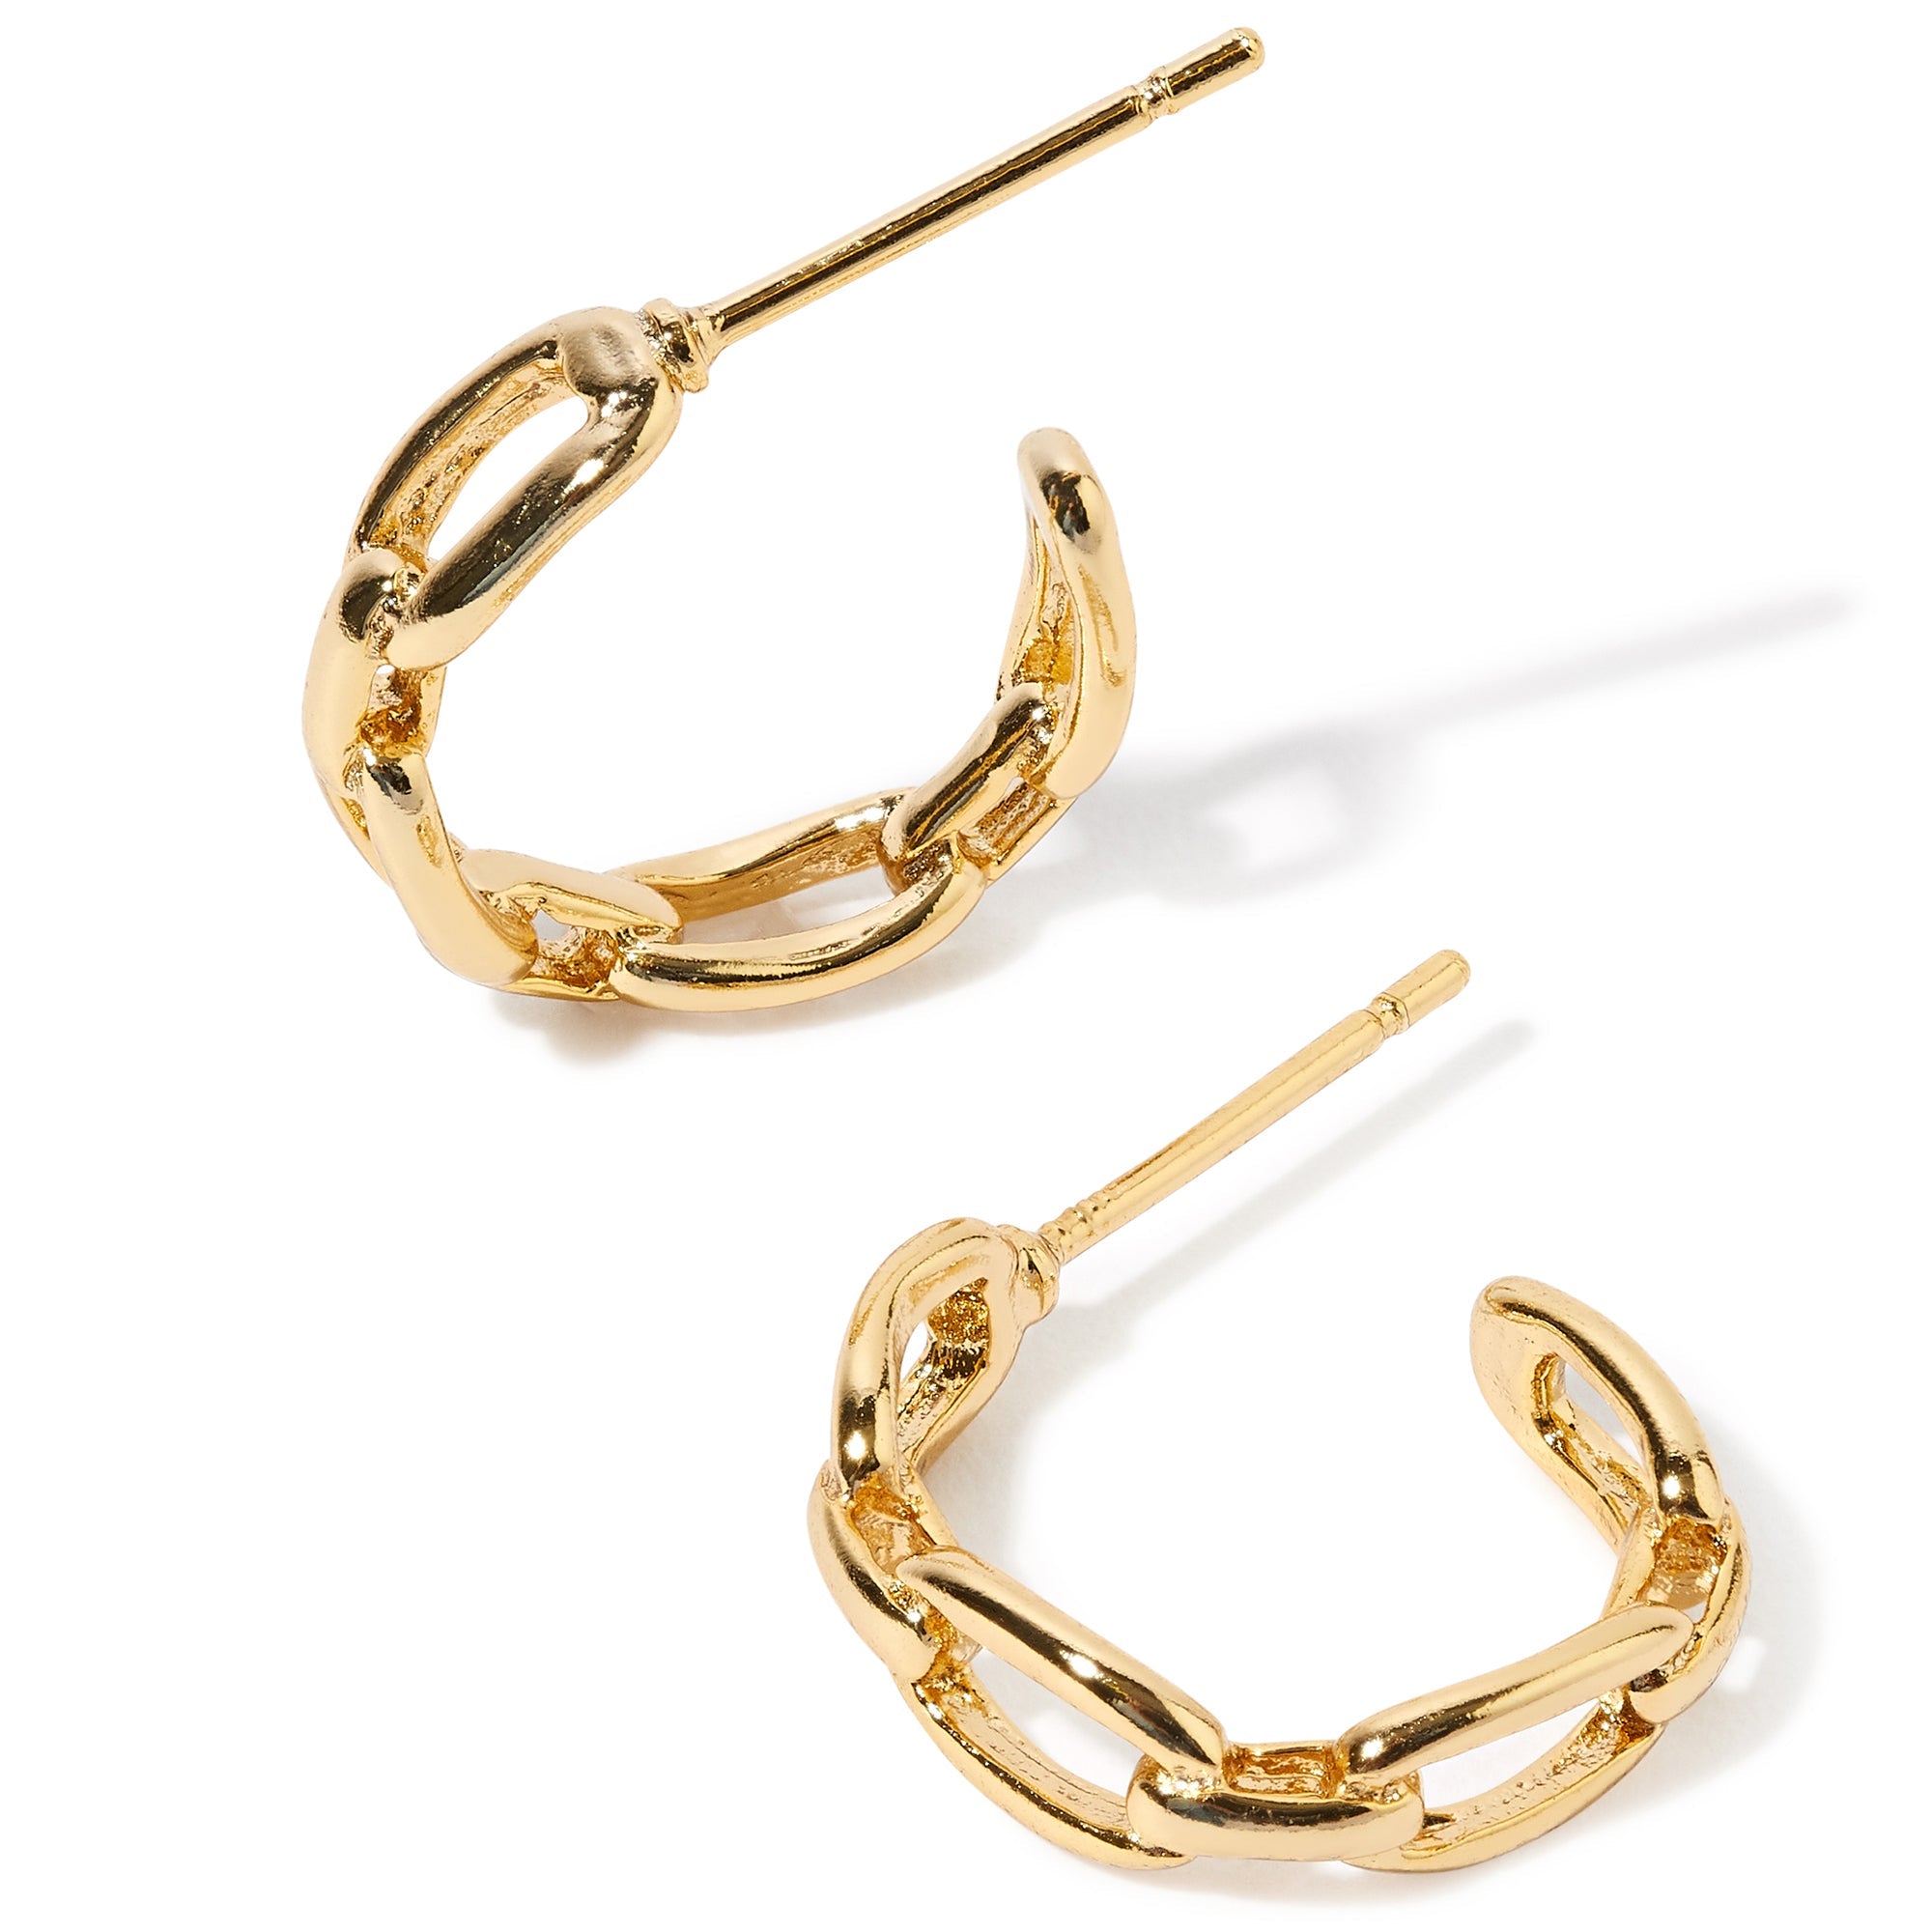 Real Gold Plated Chain Hoops Earring For Women By Accessorize London